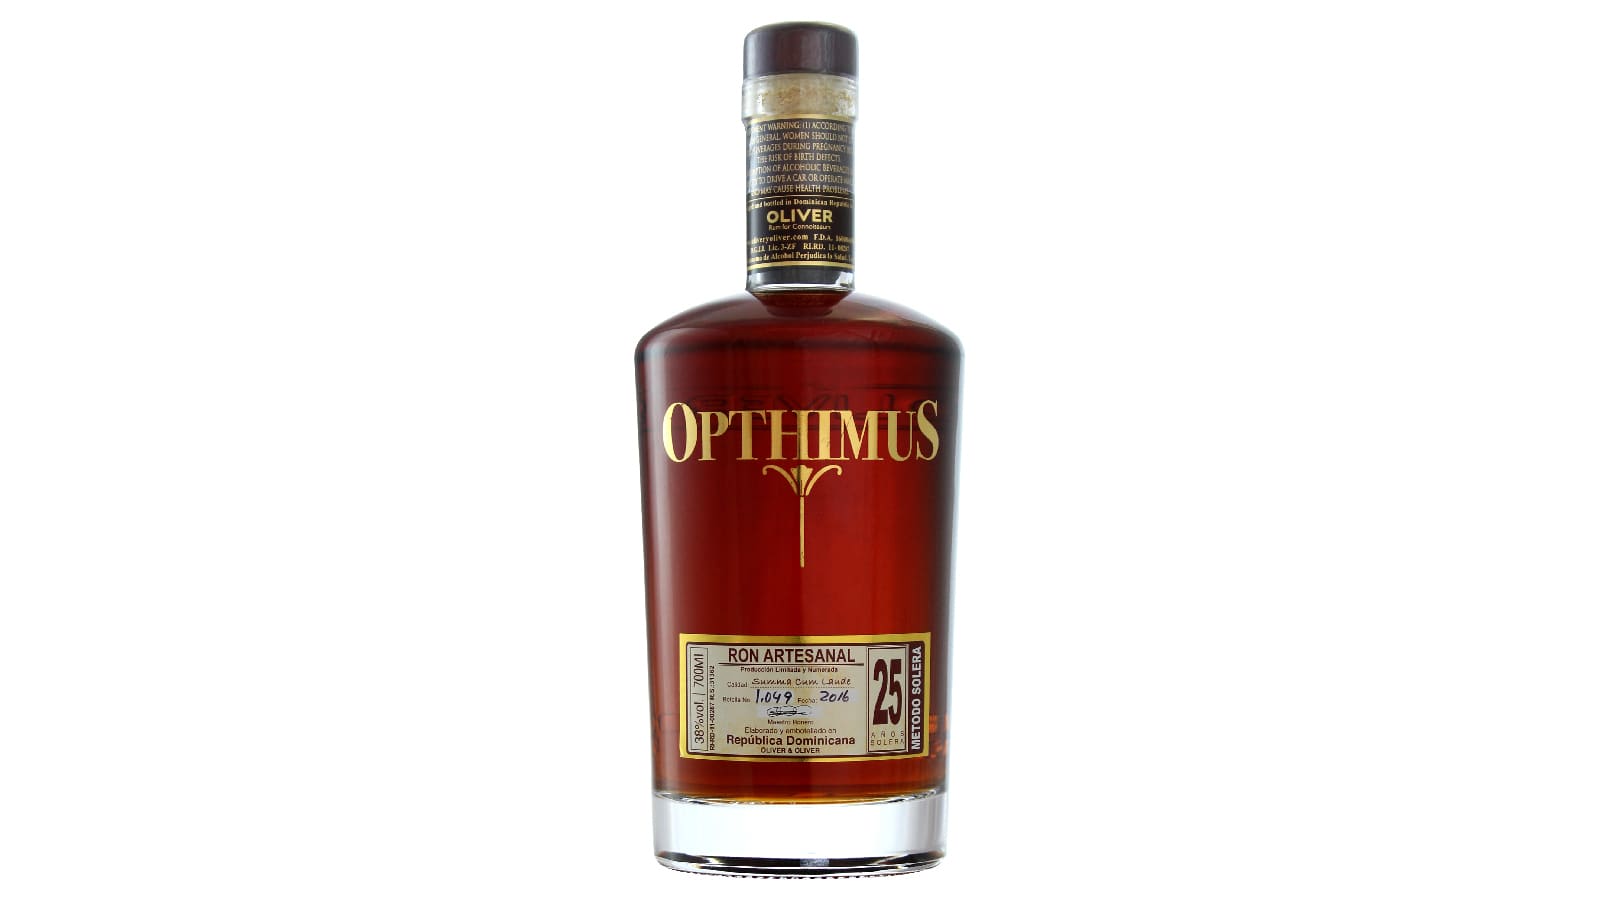 Opthimus 25 years old